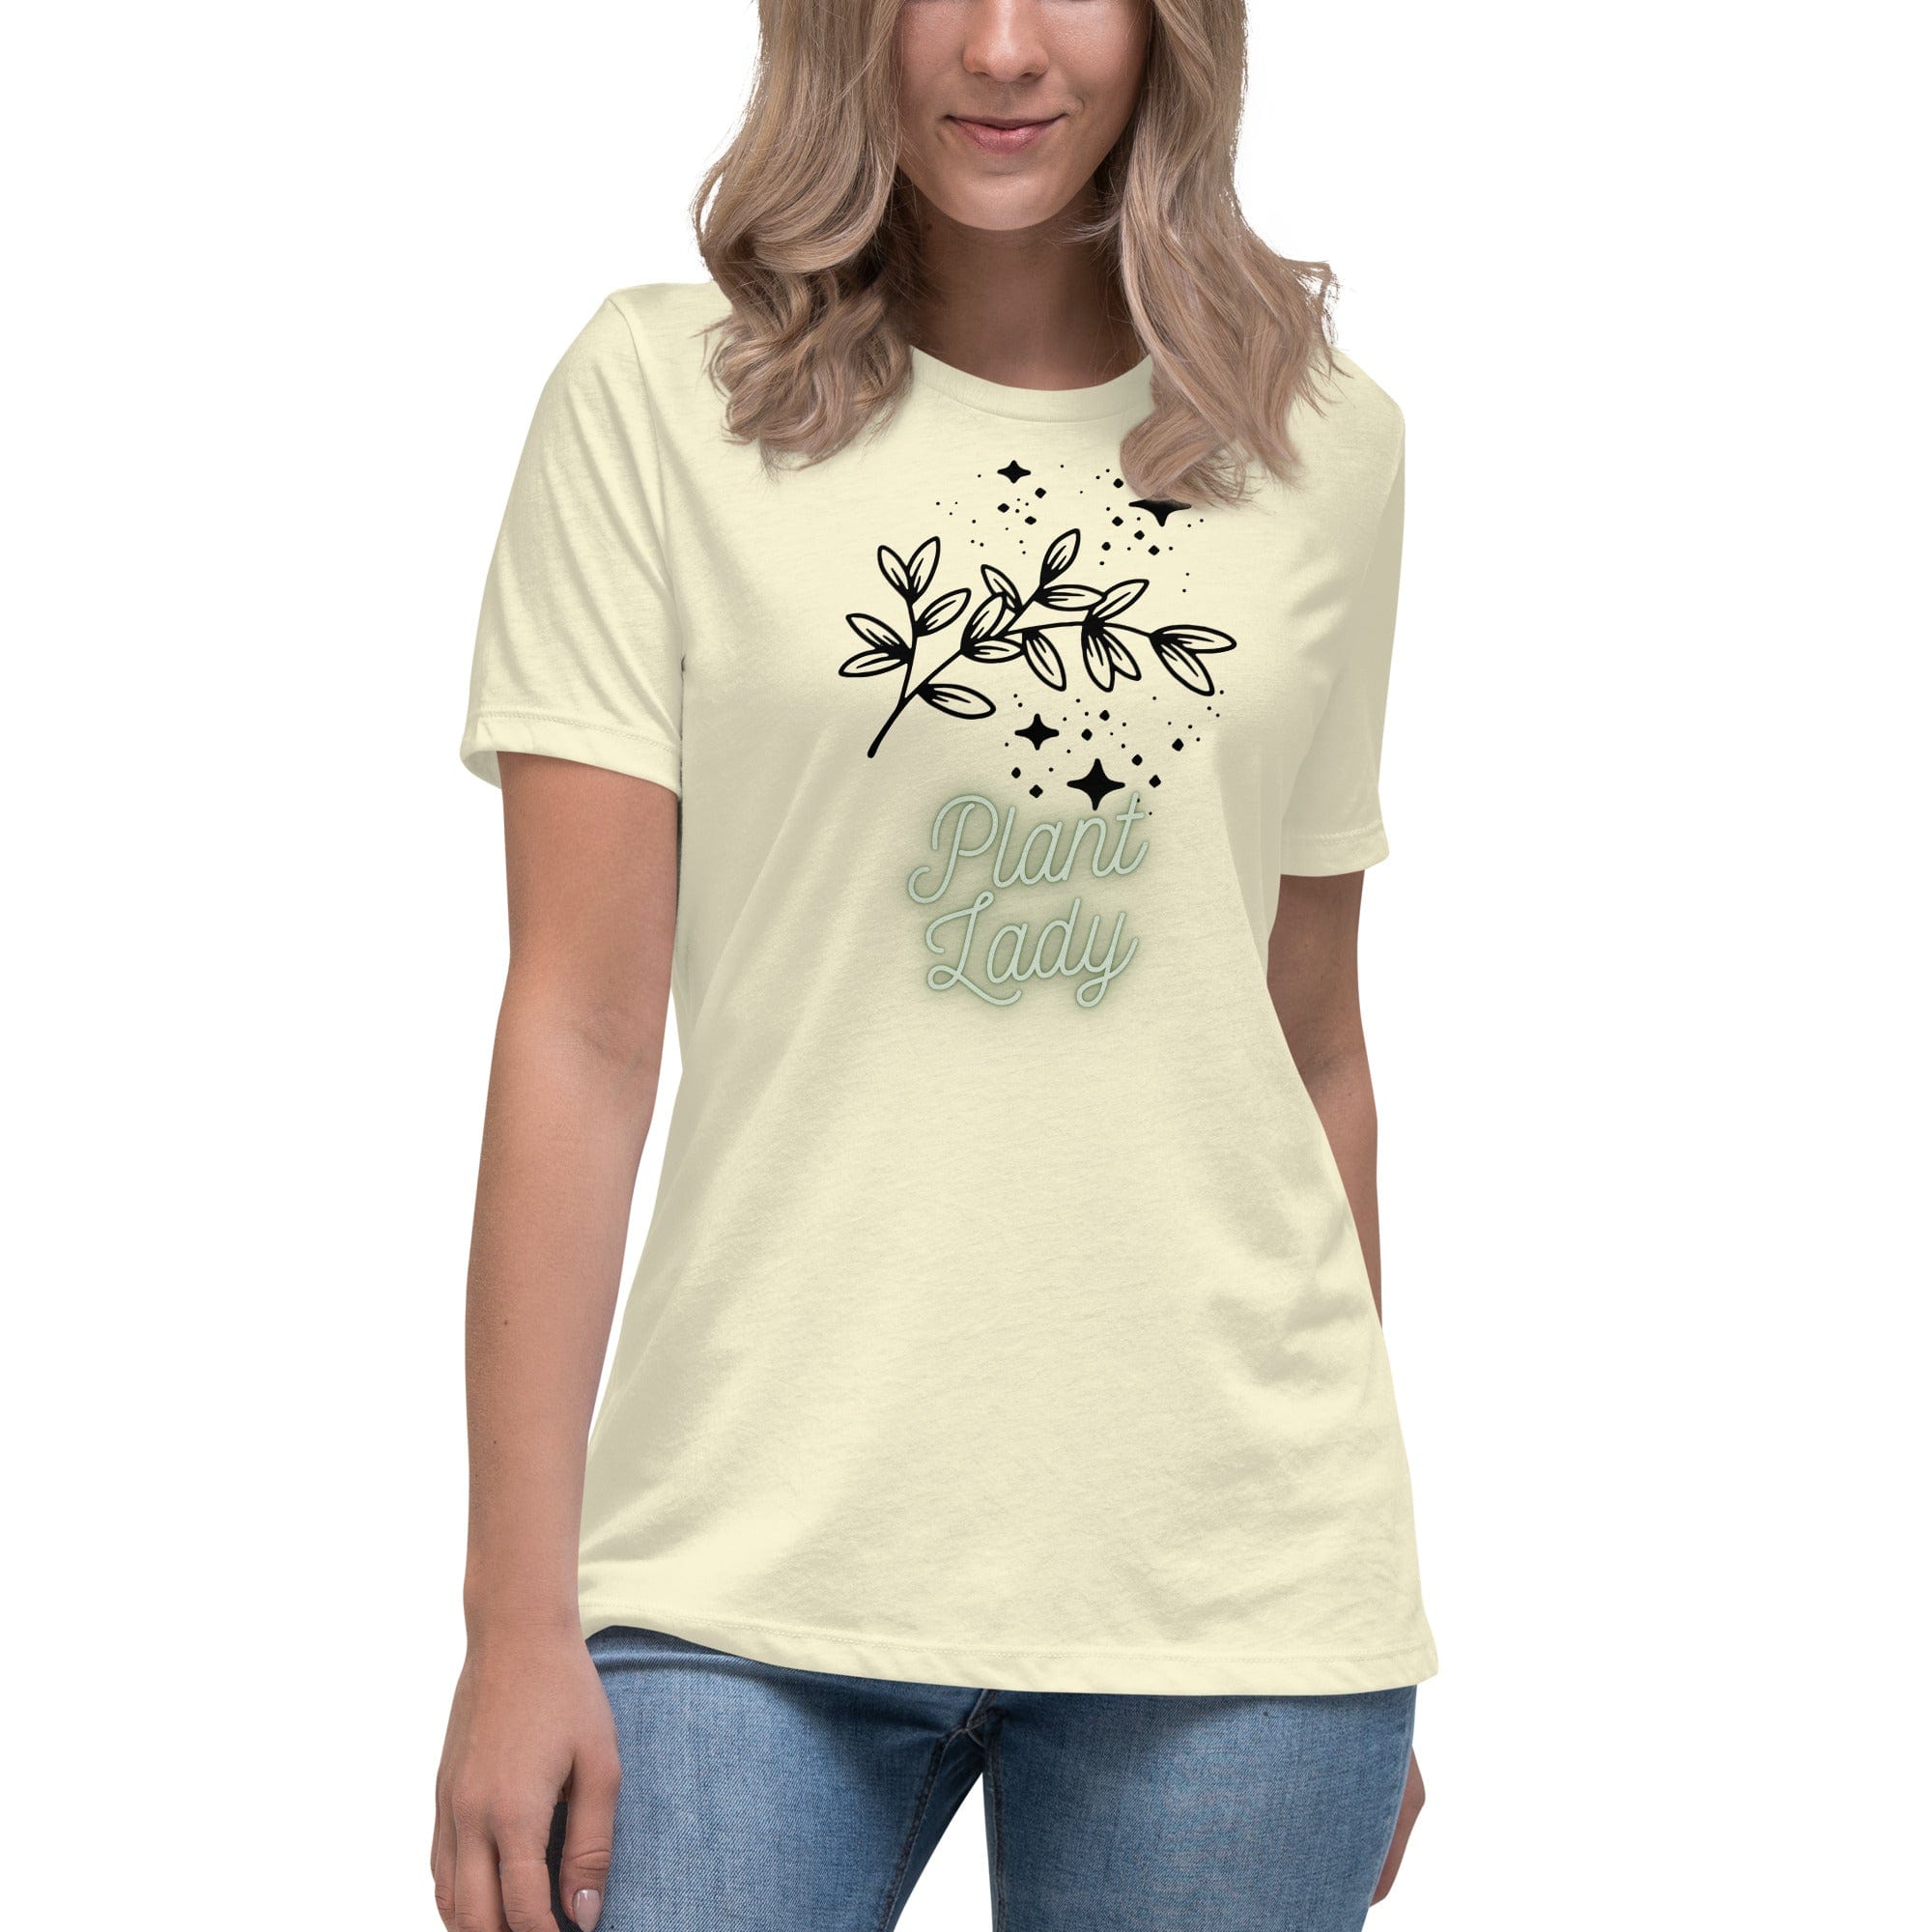 Spruced Roost Citron / S Gardner Lady - Women's Relaxed T-Shirt - S-3XL